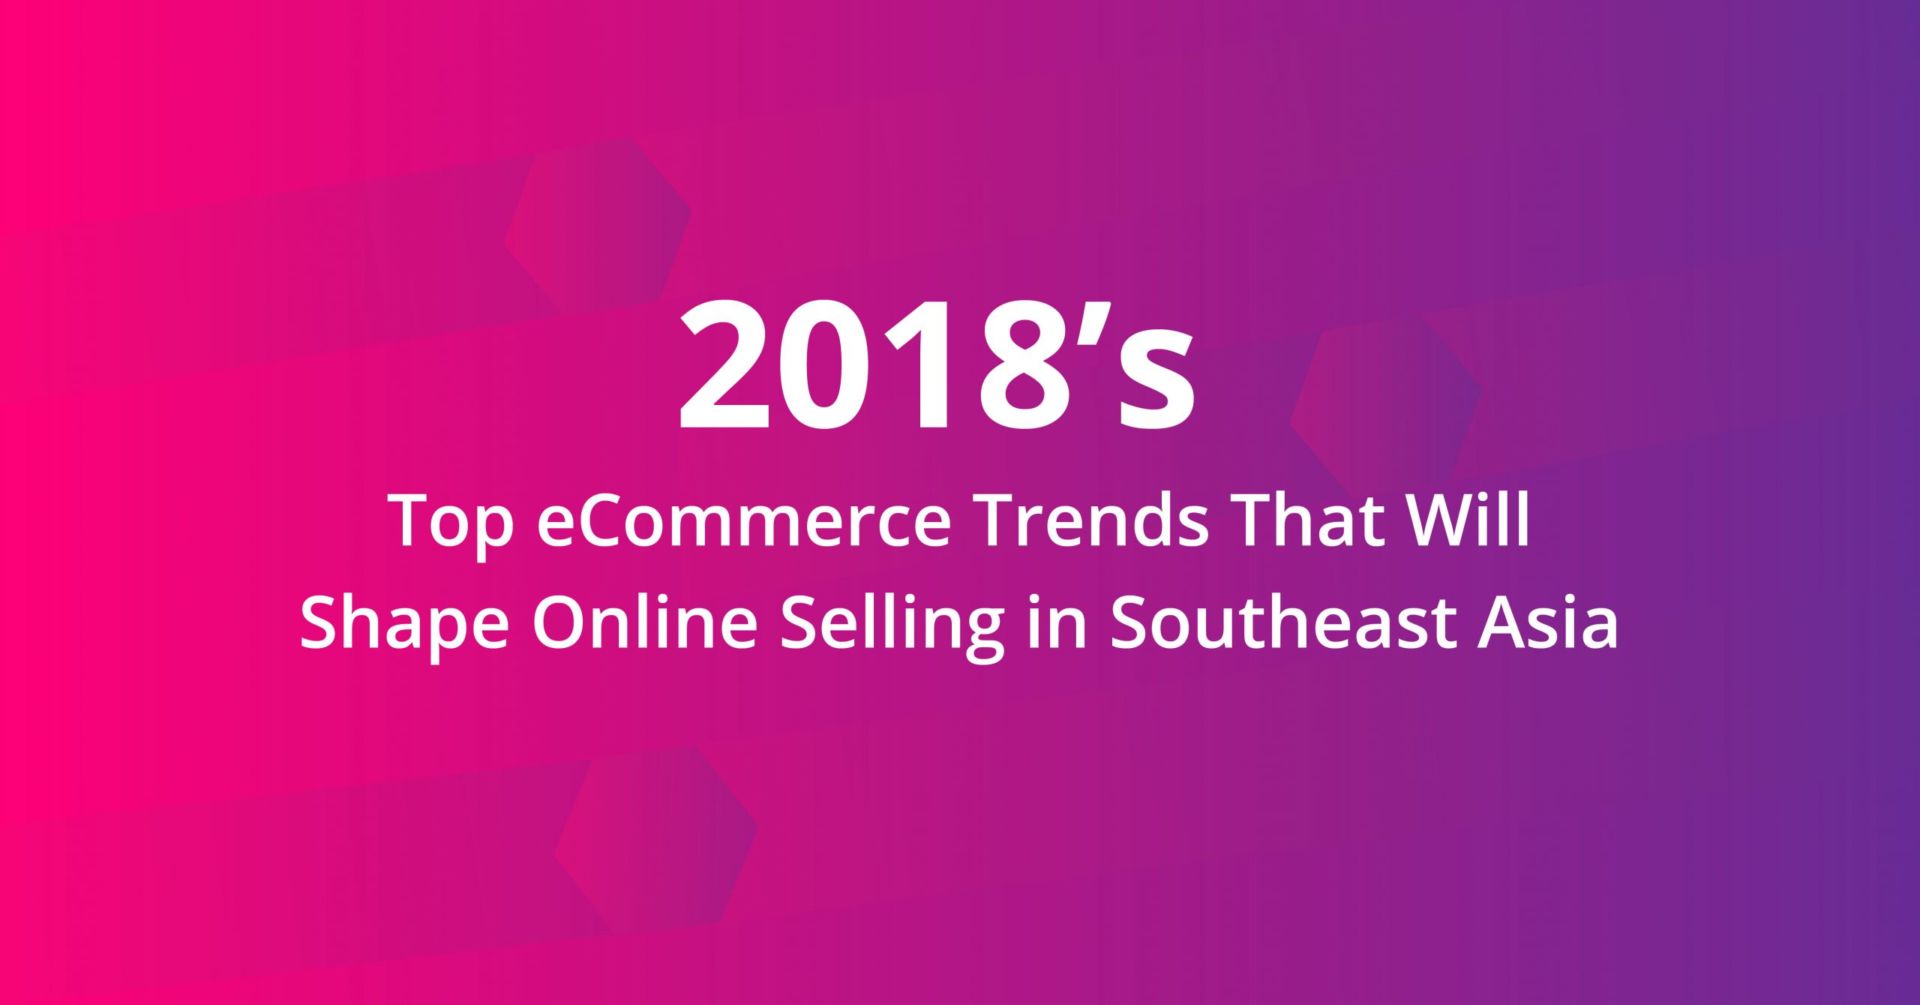 2018’s Top E-commerce Trends That Will Shape Online Selling in Southeast Asia